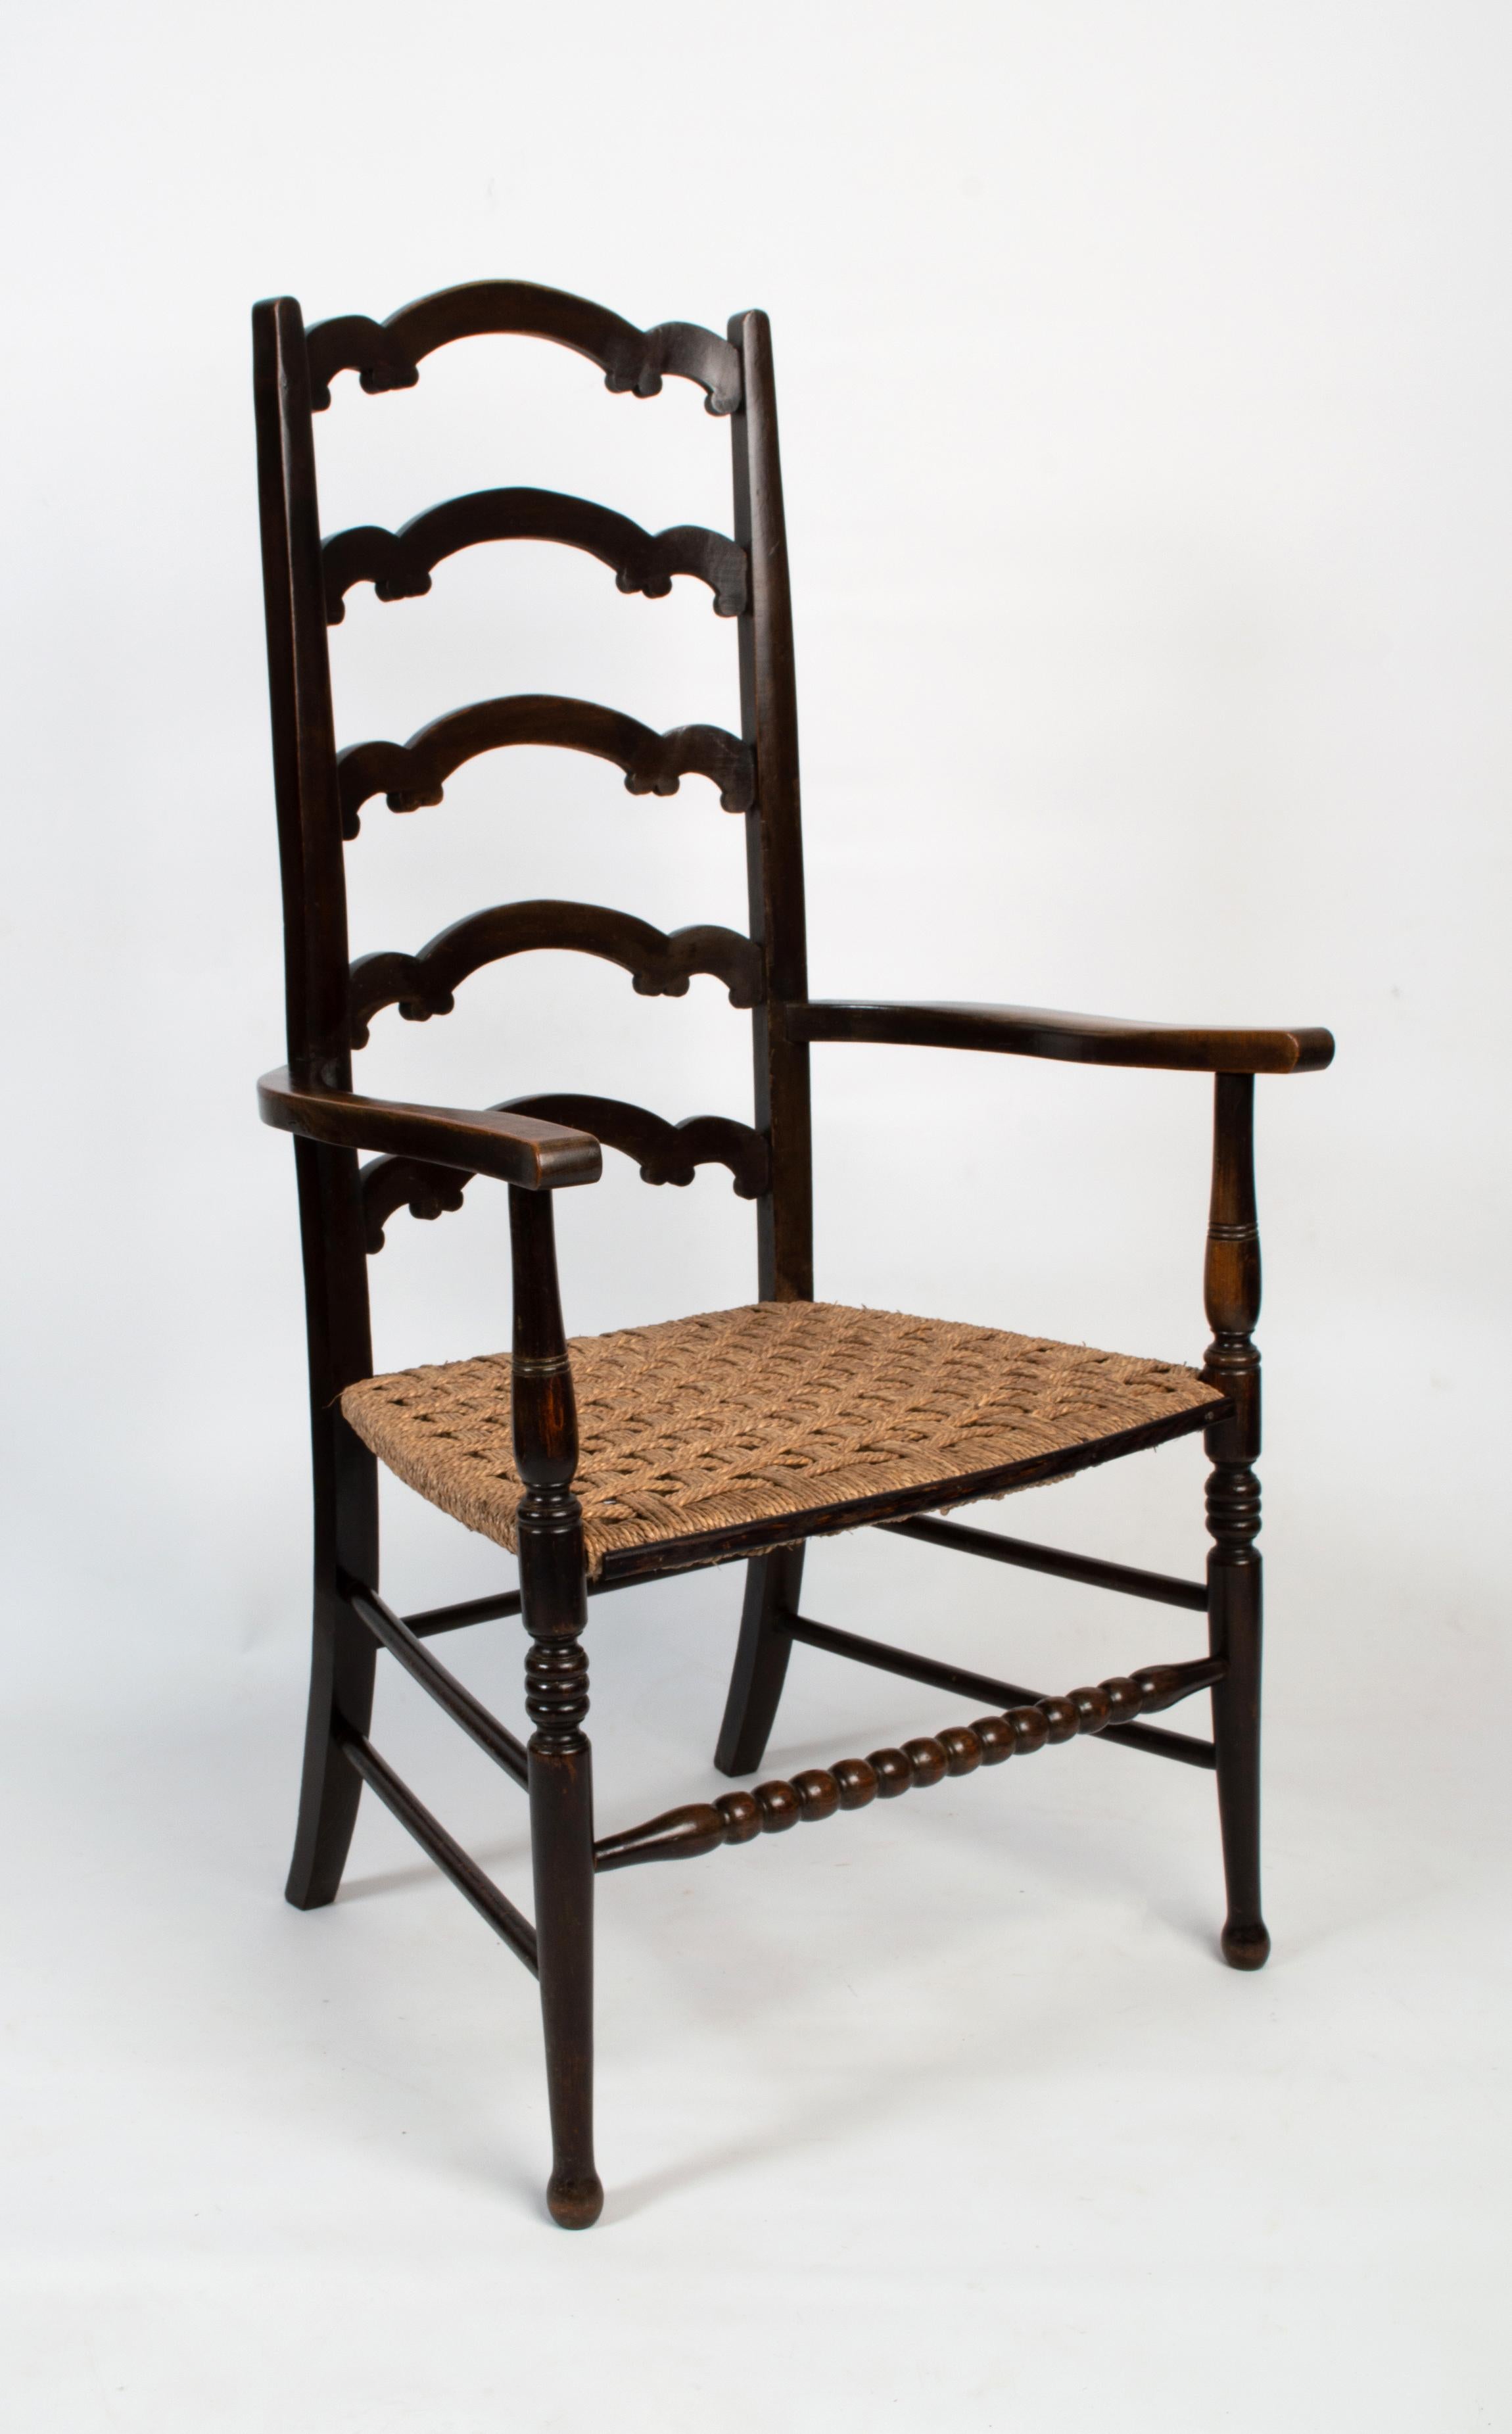 Antique English Arts & Crafts William Birch Liberty & Co. Elbow Chair.
circa1890
Very good solid condition commensurate of age. Later replaced raffia seat.